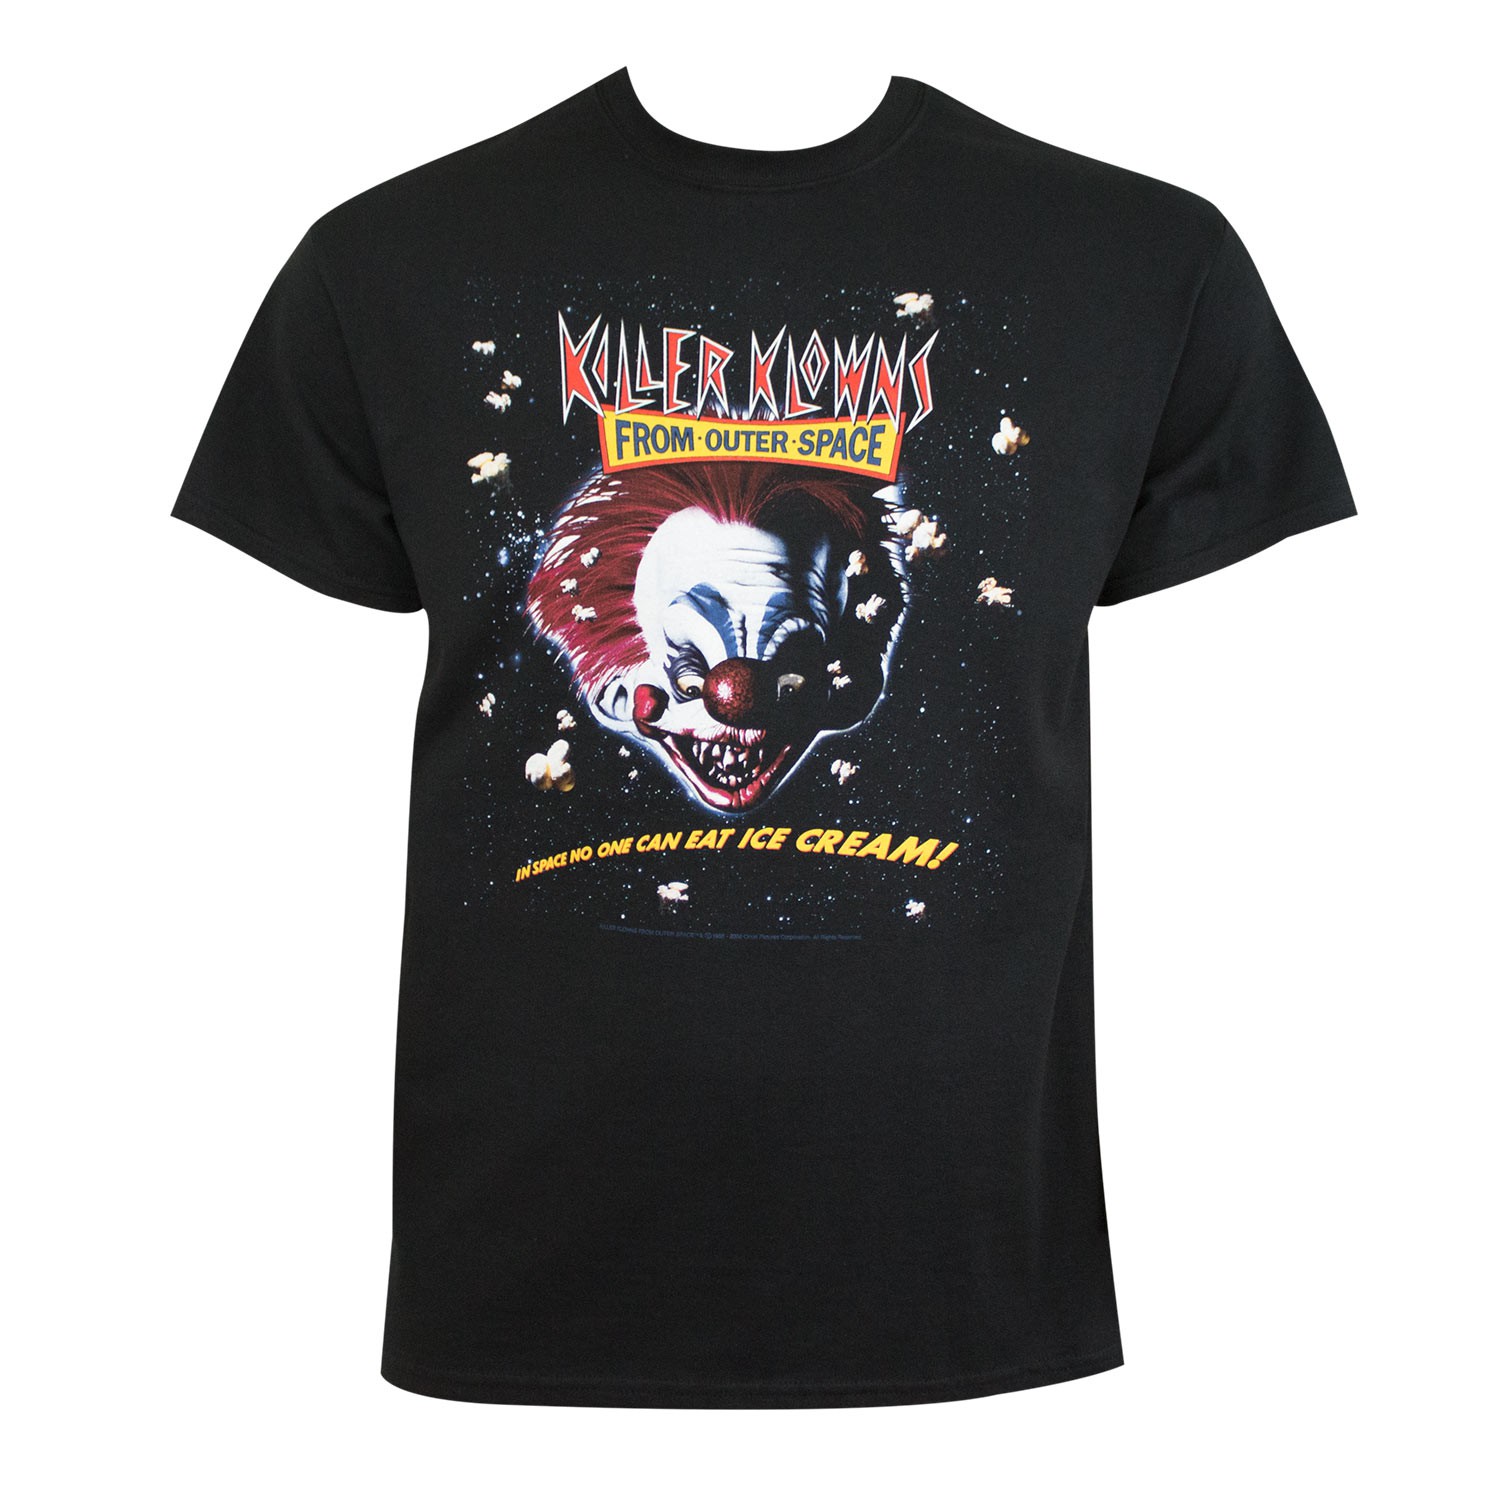 Killer Klowns From Outerspace Tee Shirt